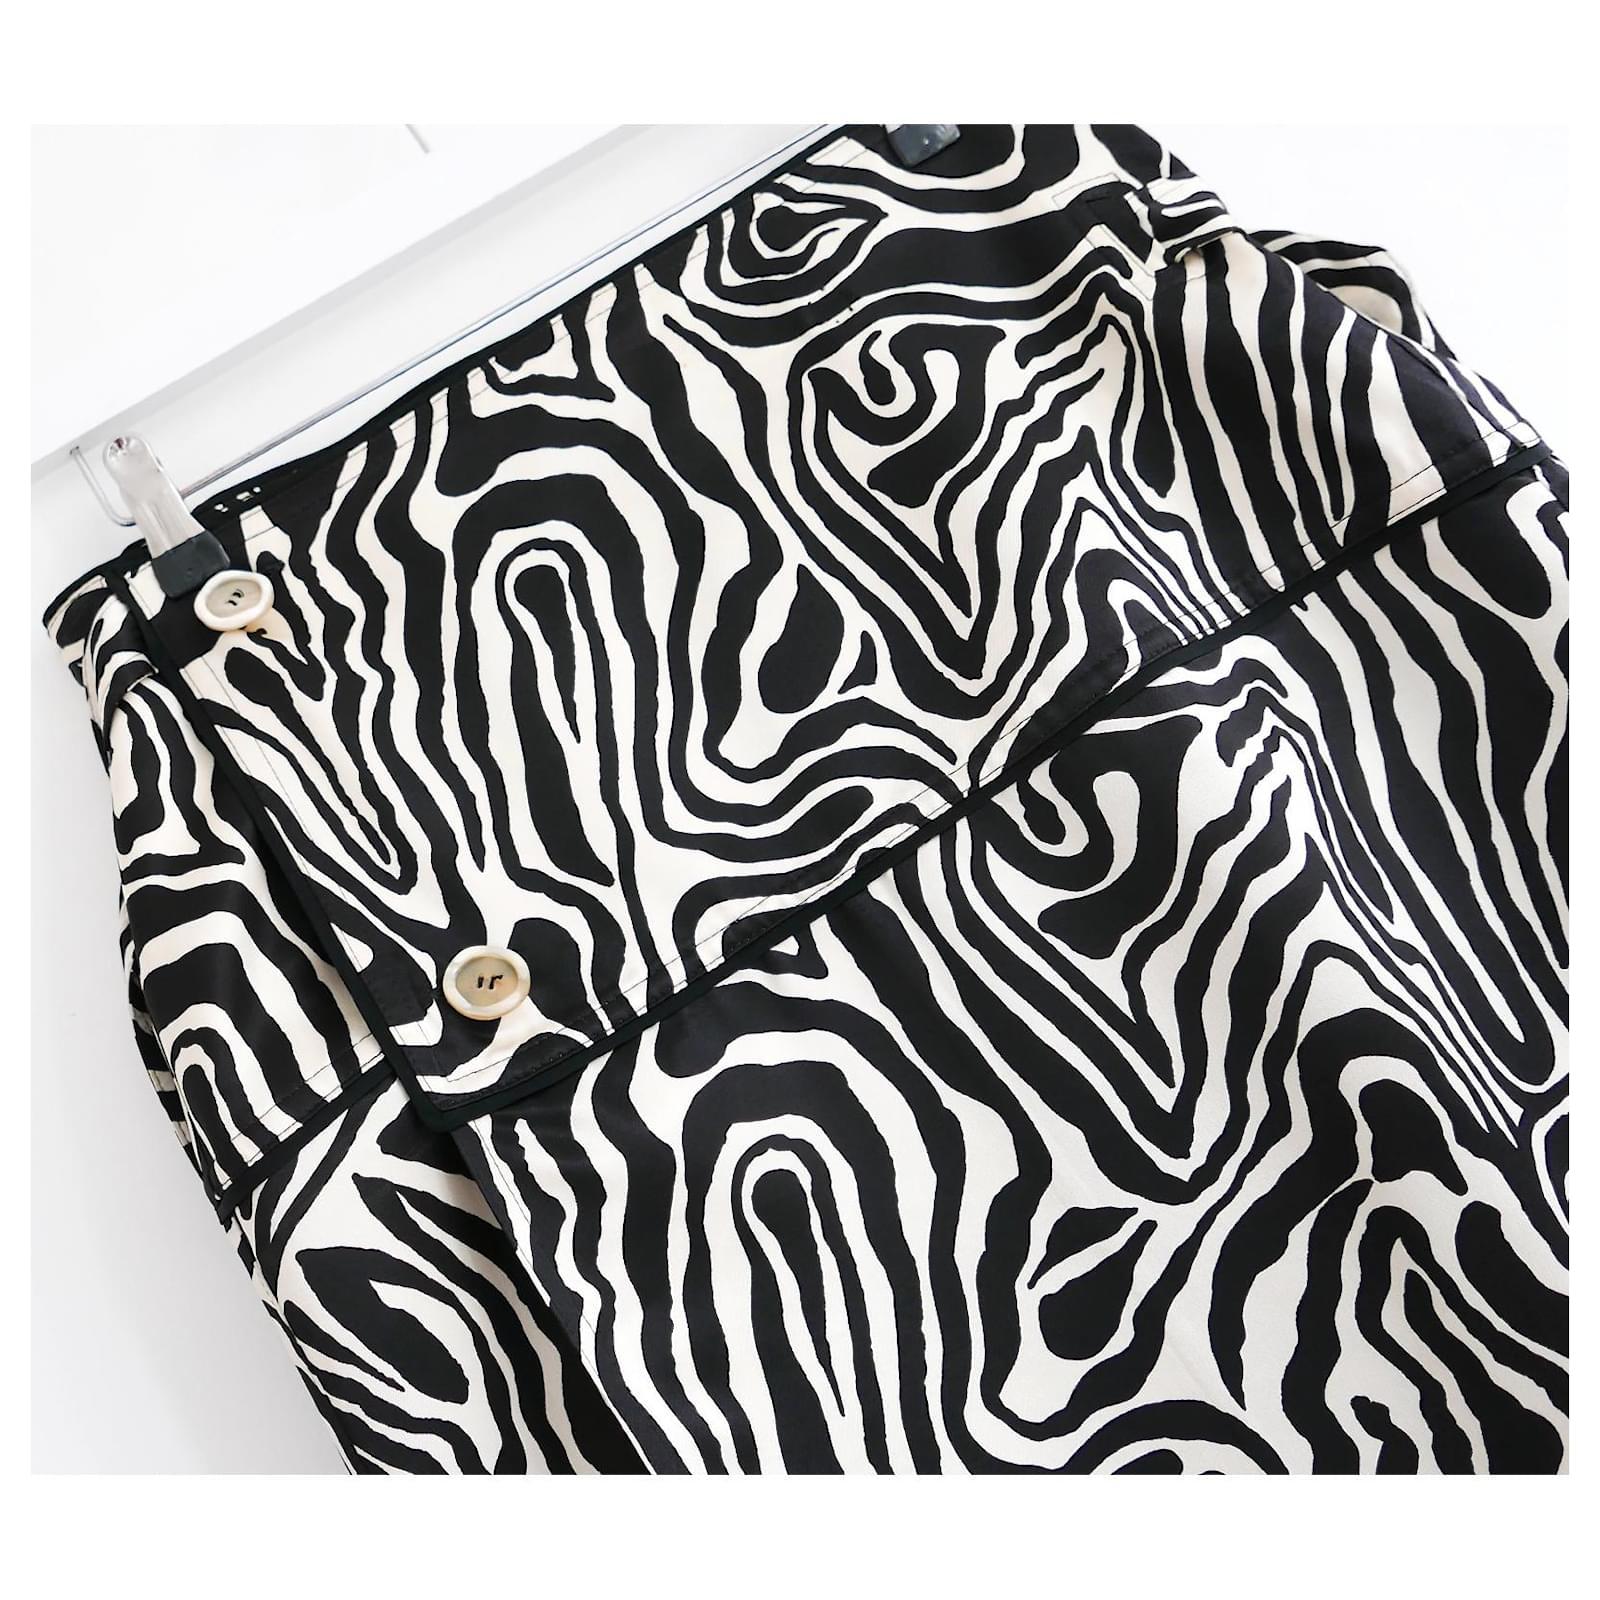 Arty cool Marni zebra print midi skirt - bought for £895 and worn twice. Has been newly dry cleaned. Made from thick, smooth viscose sateen, it has a low sitting, wrap cut with chunky button and popper fastening and long d ring straps to each side.